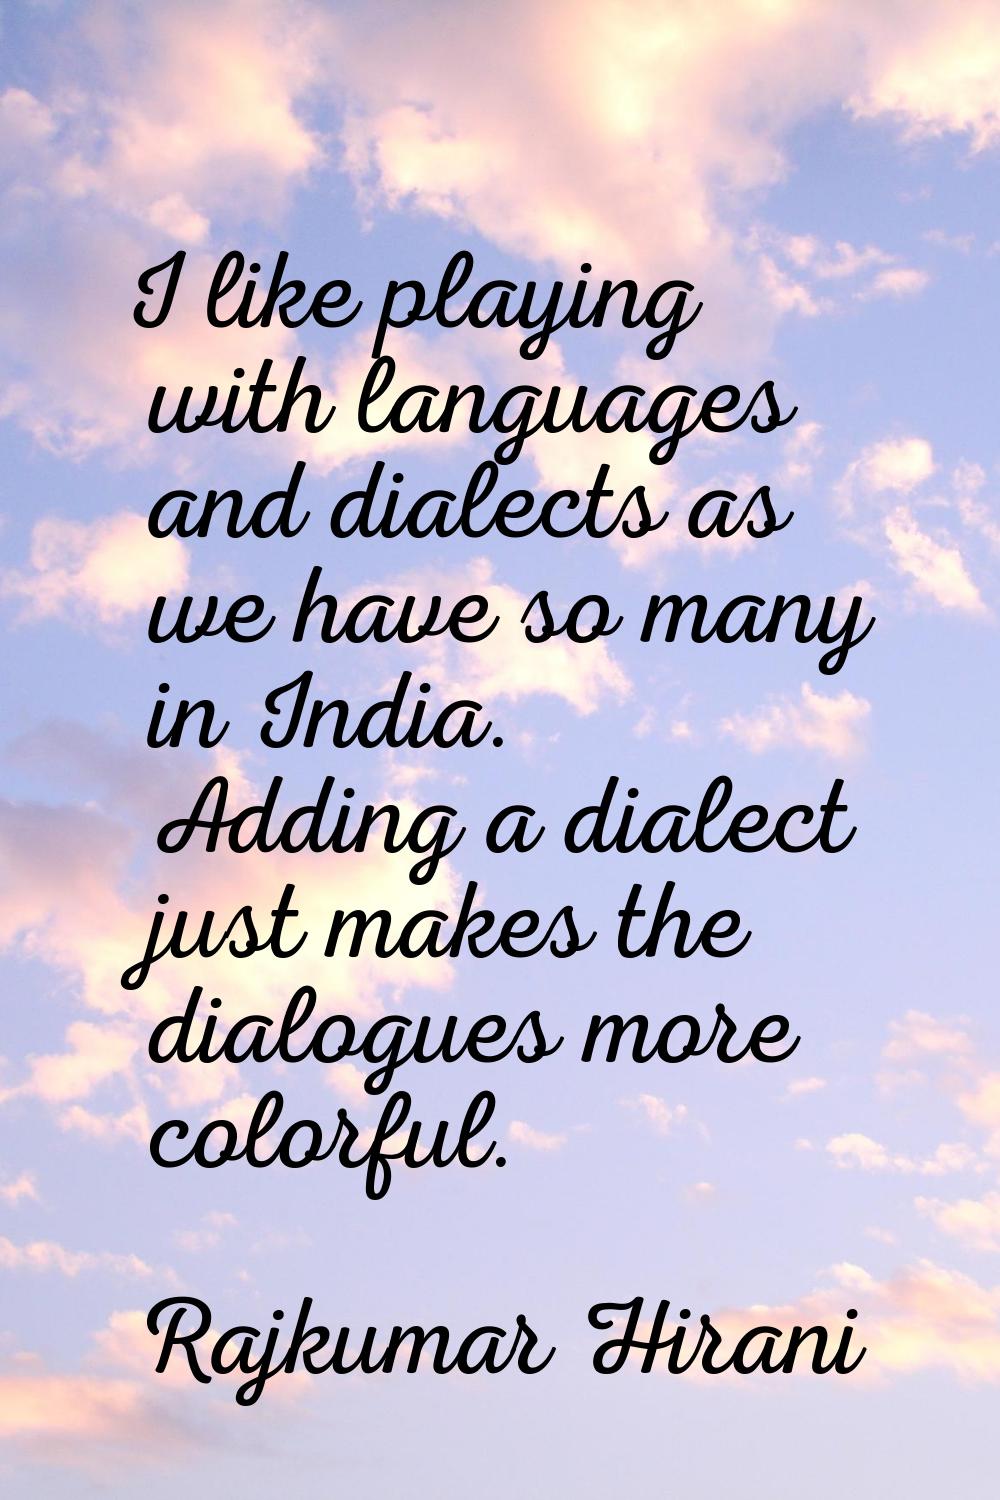 I like playing with languages and dialects as we have so many in India. Adding a dialect just makes